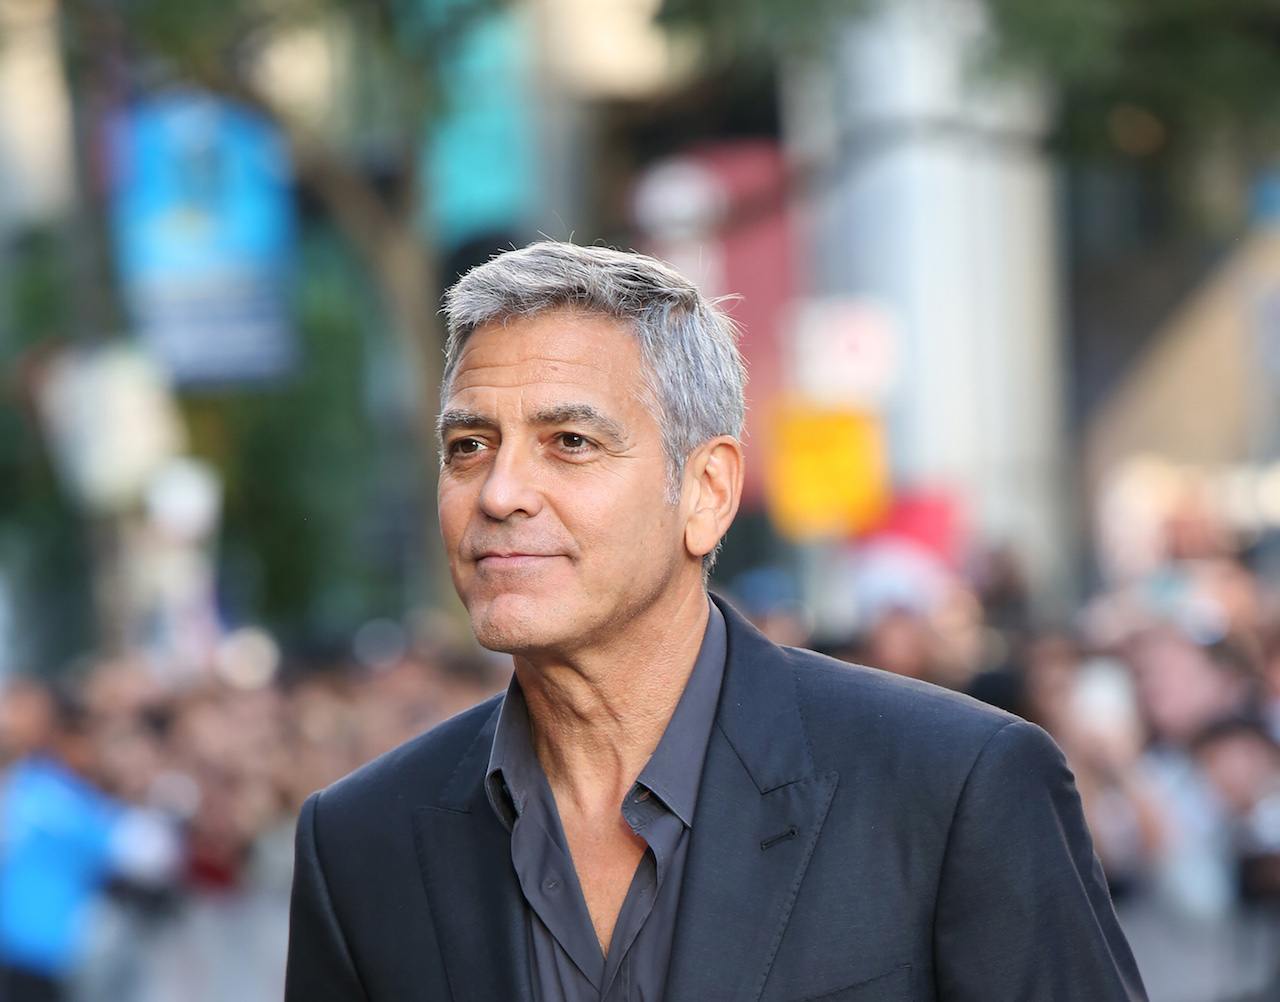 TORONTO, ON - SEPTEMBER 09: George Clooney attends the 'Suburbicon' premiere during the 2017 Toronto International Film Festival at Princess of Wales Theatre on September 9, 2017 in Toronto, Canada. (Photo by Walter McBride/FilmMagic)